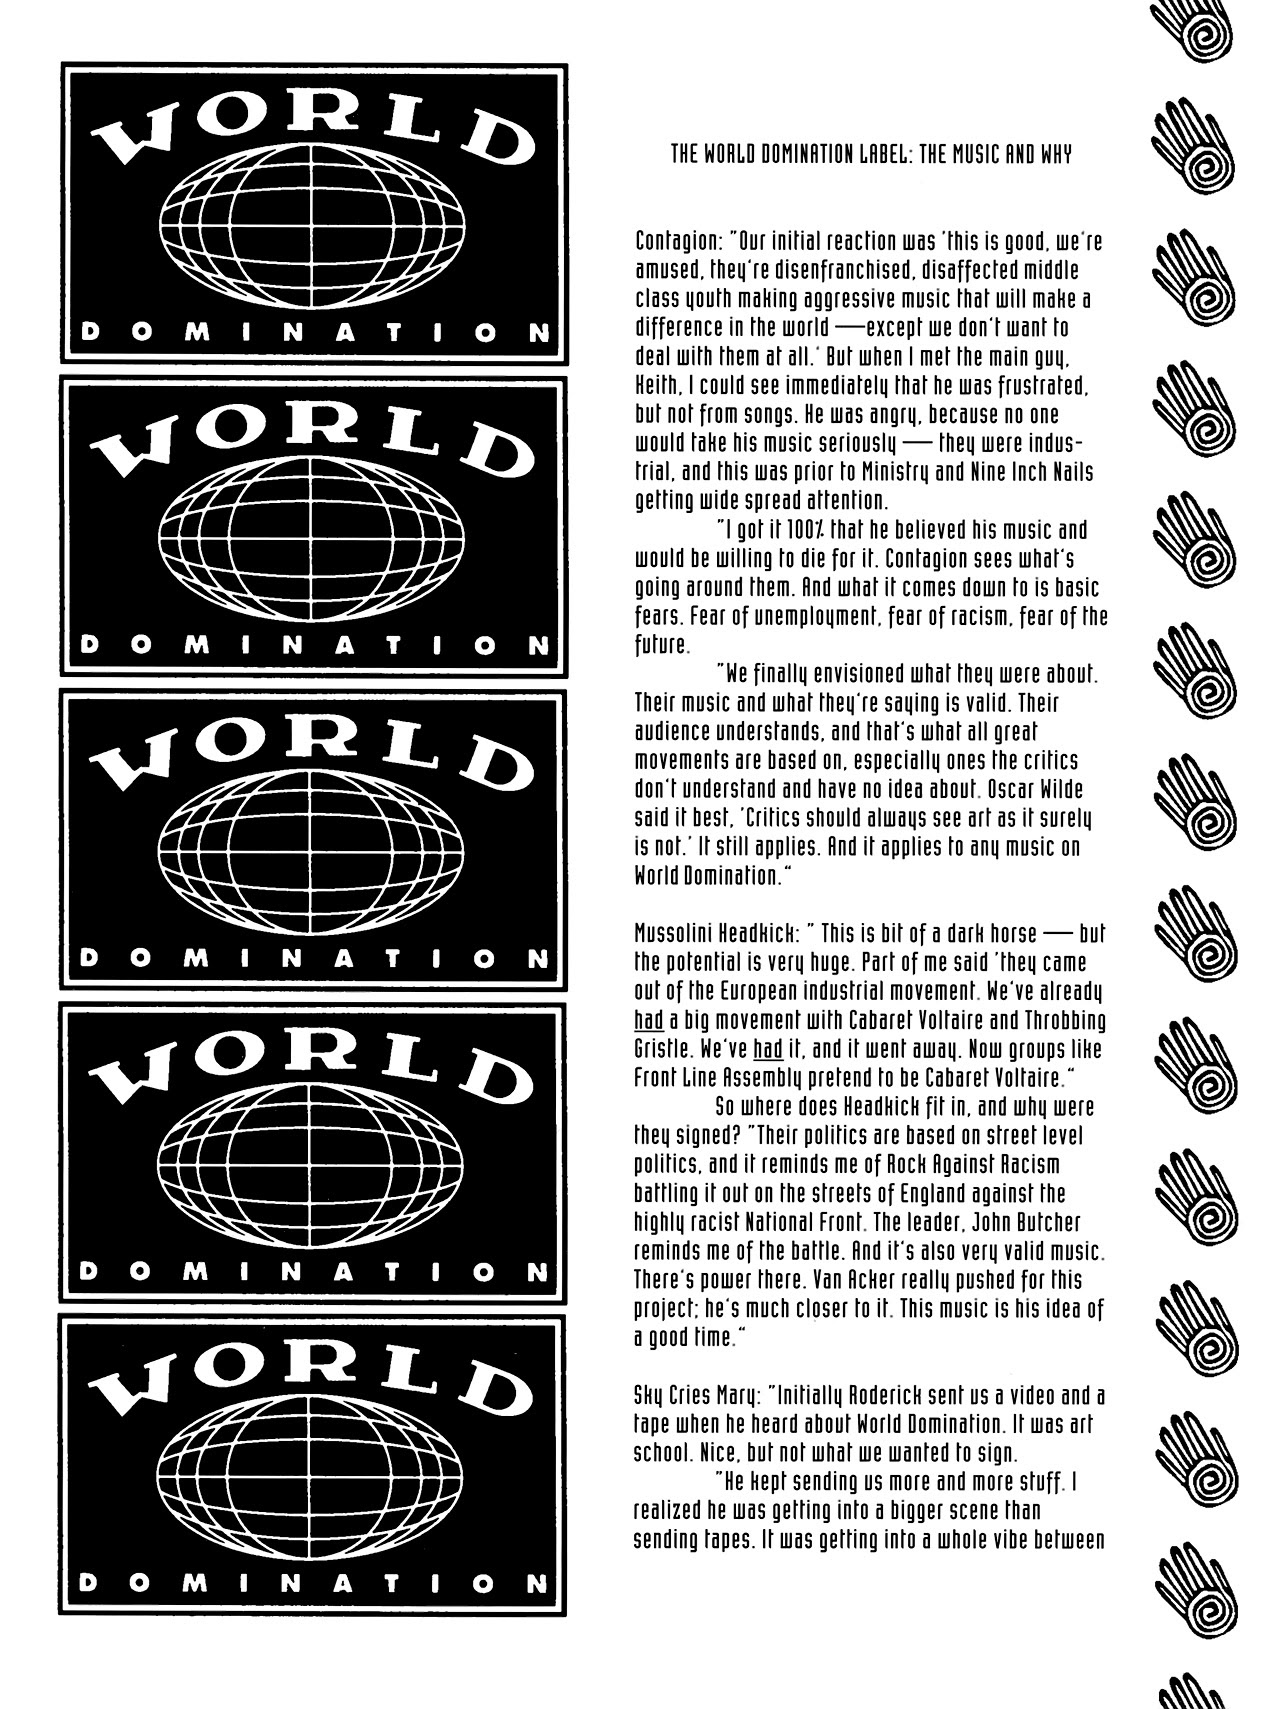 Read online World Domination comic -  Issue # Full - 45